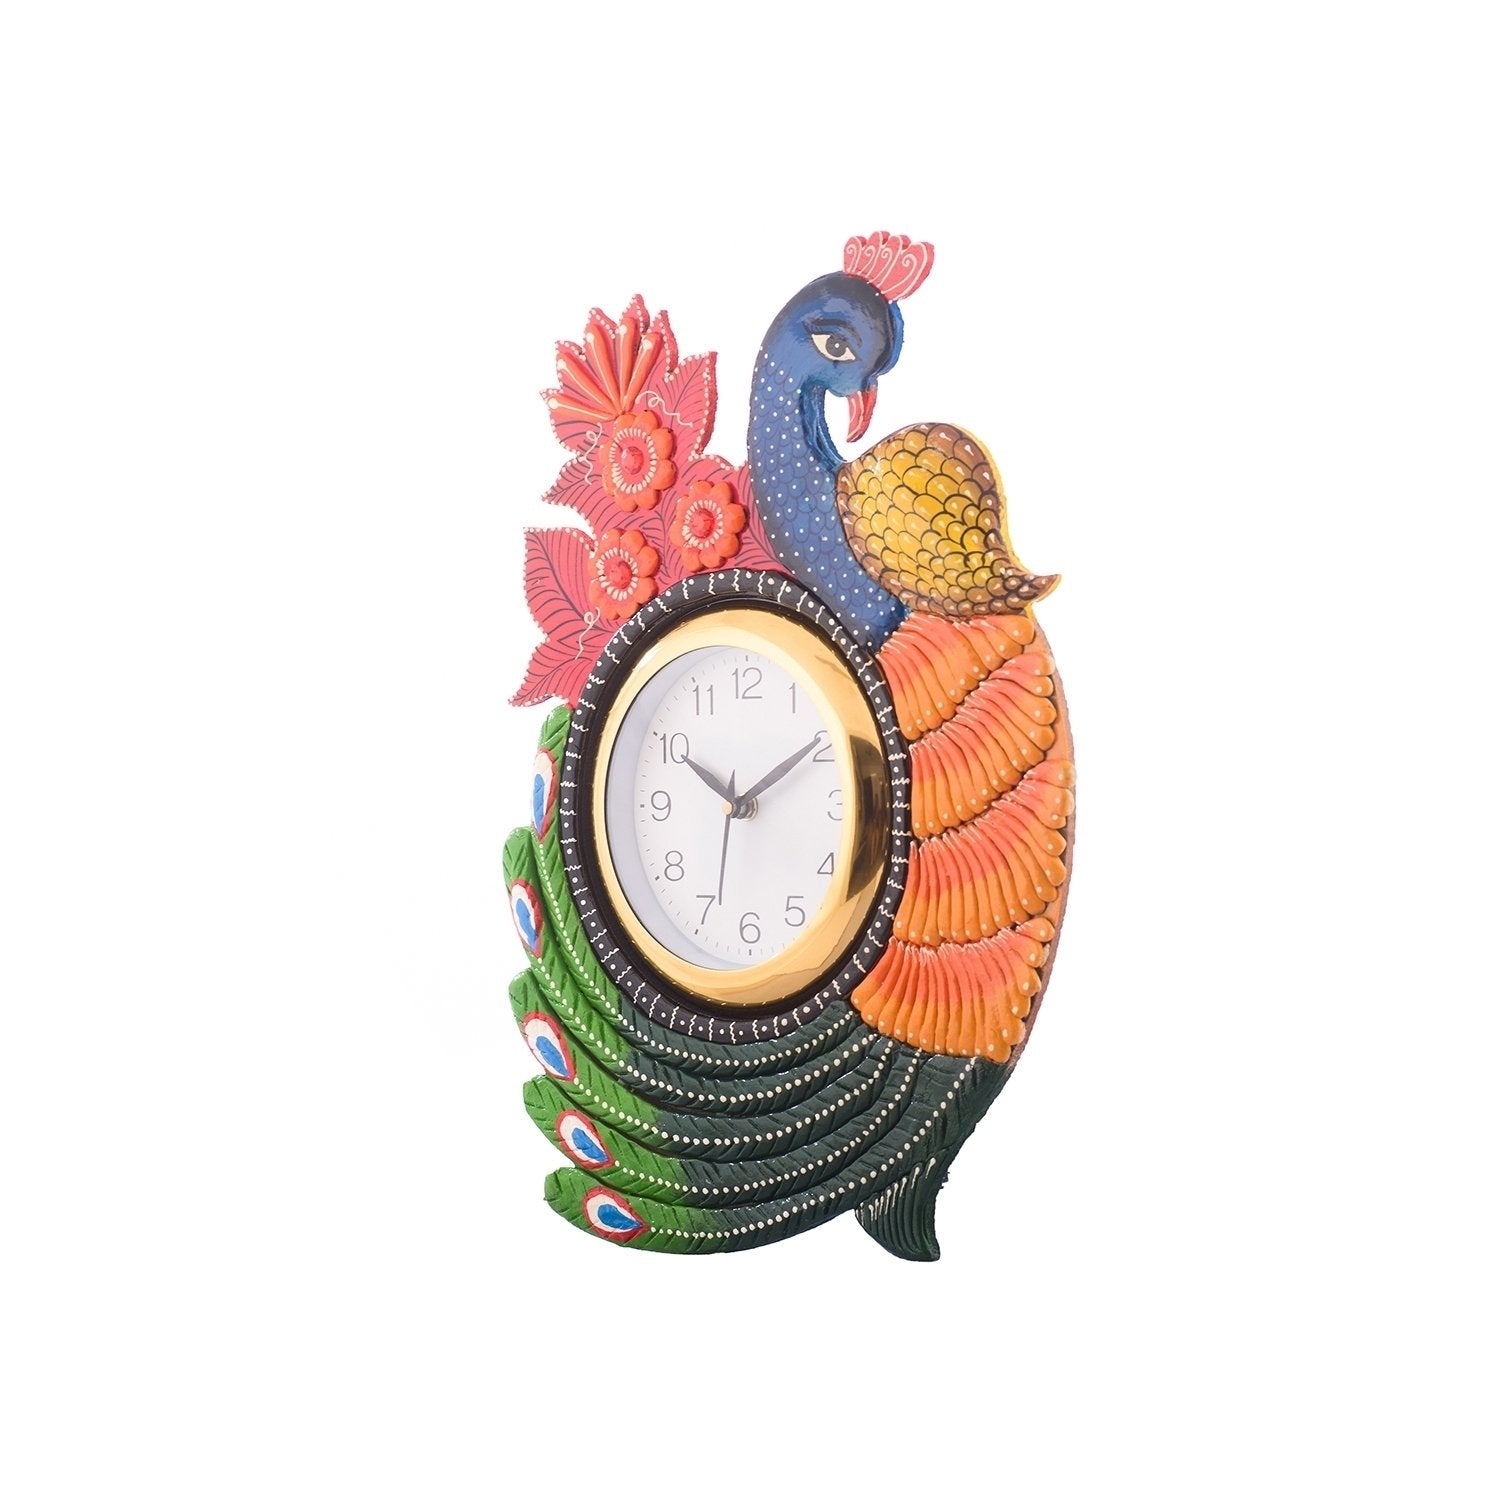 Exotic and Stylish Colorful Peacock Wooden Handcrafted Wooden Wall Clock (H - 16.5 Inch) 4